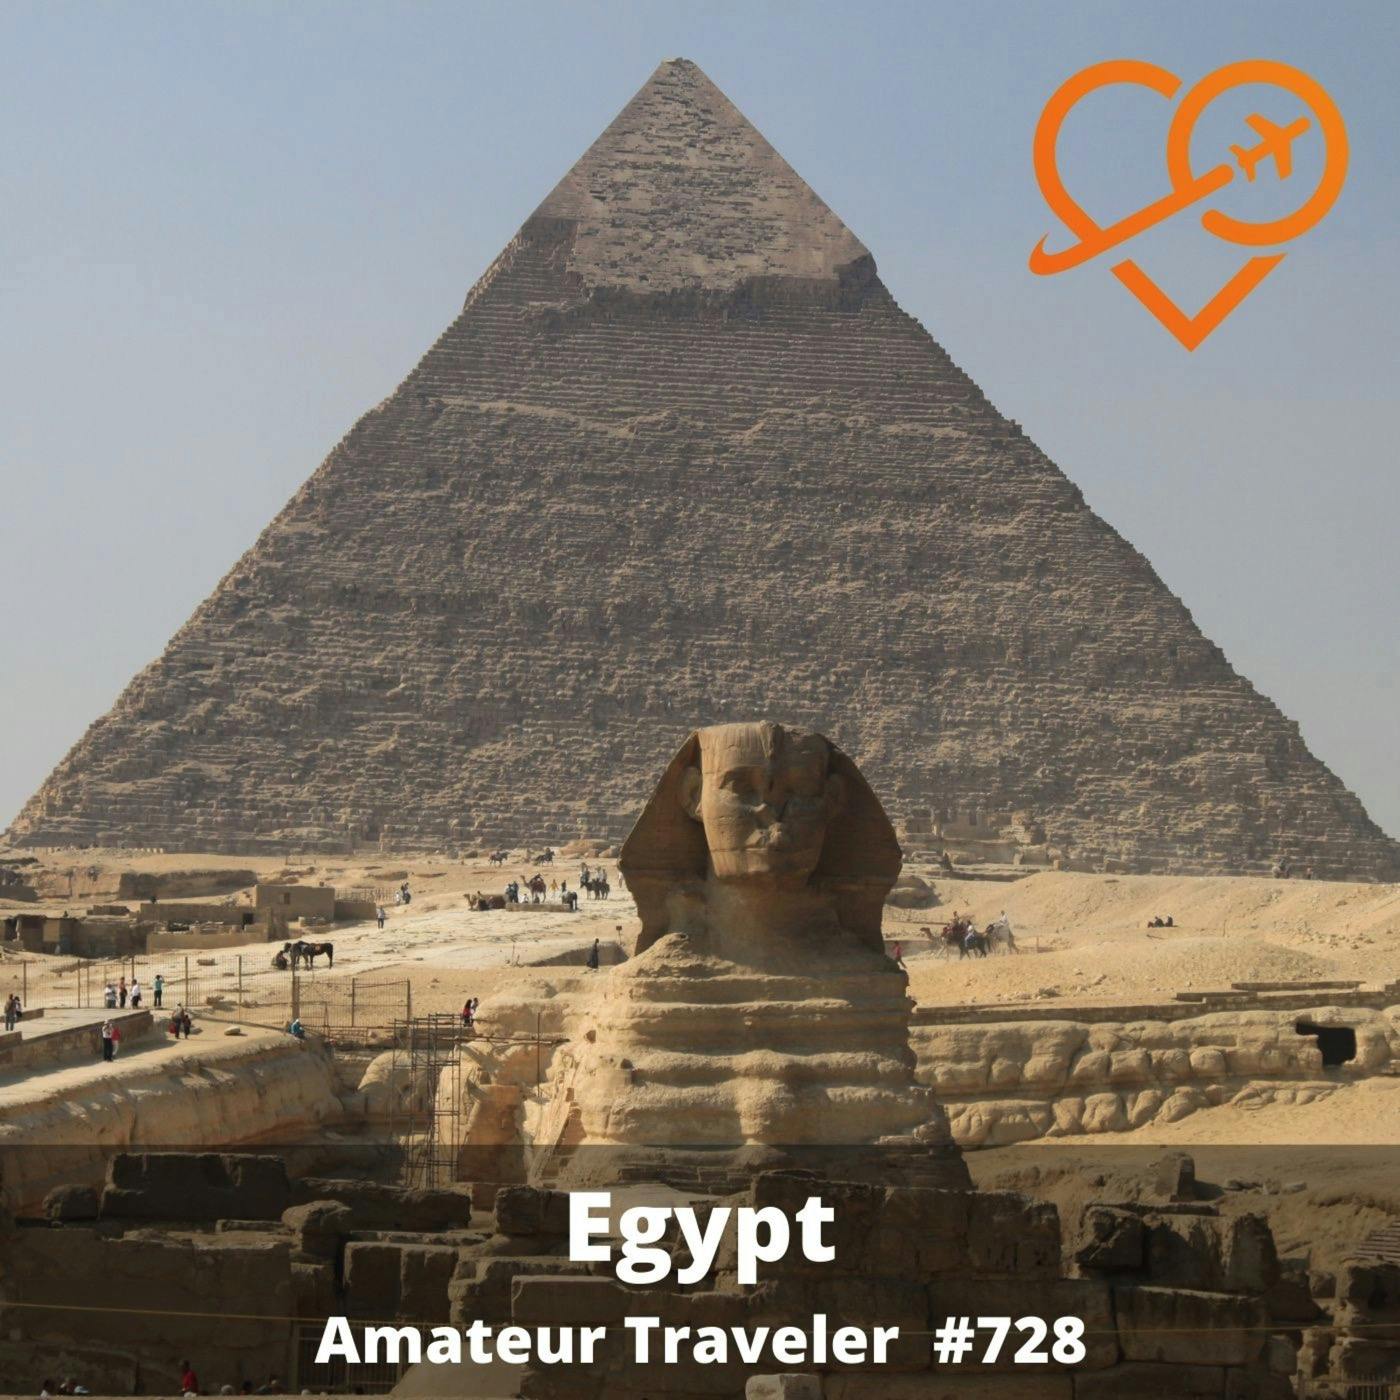 AT#728 - Travel to Egypt